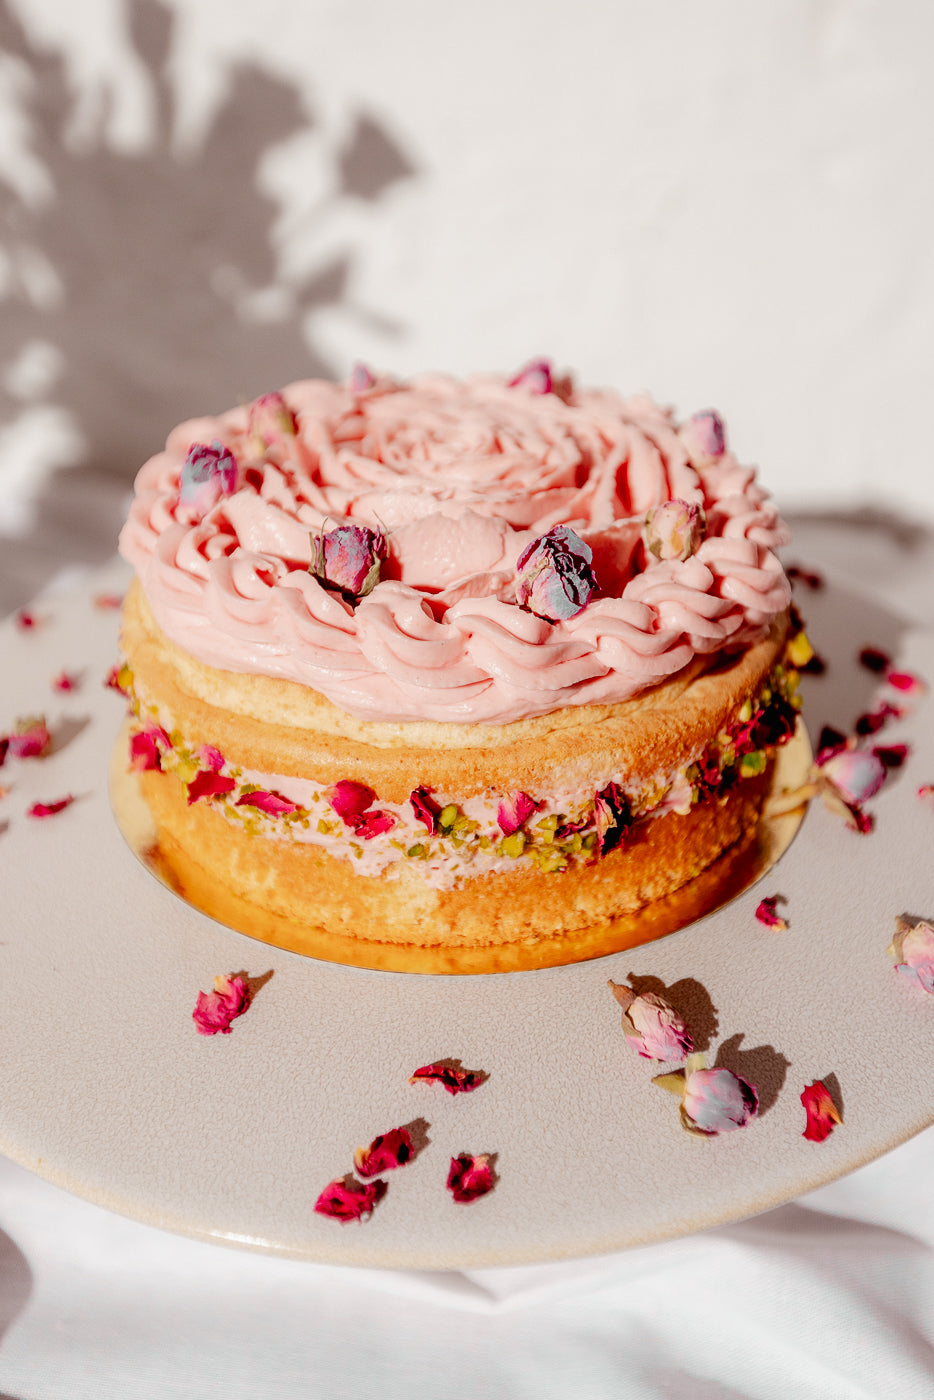 Our new Valentine's Cake: A Persian-inspired love cake